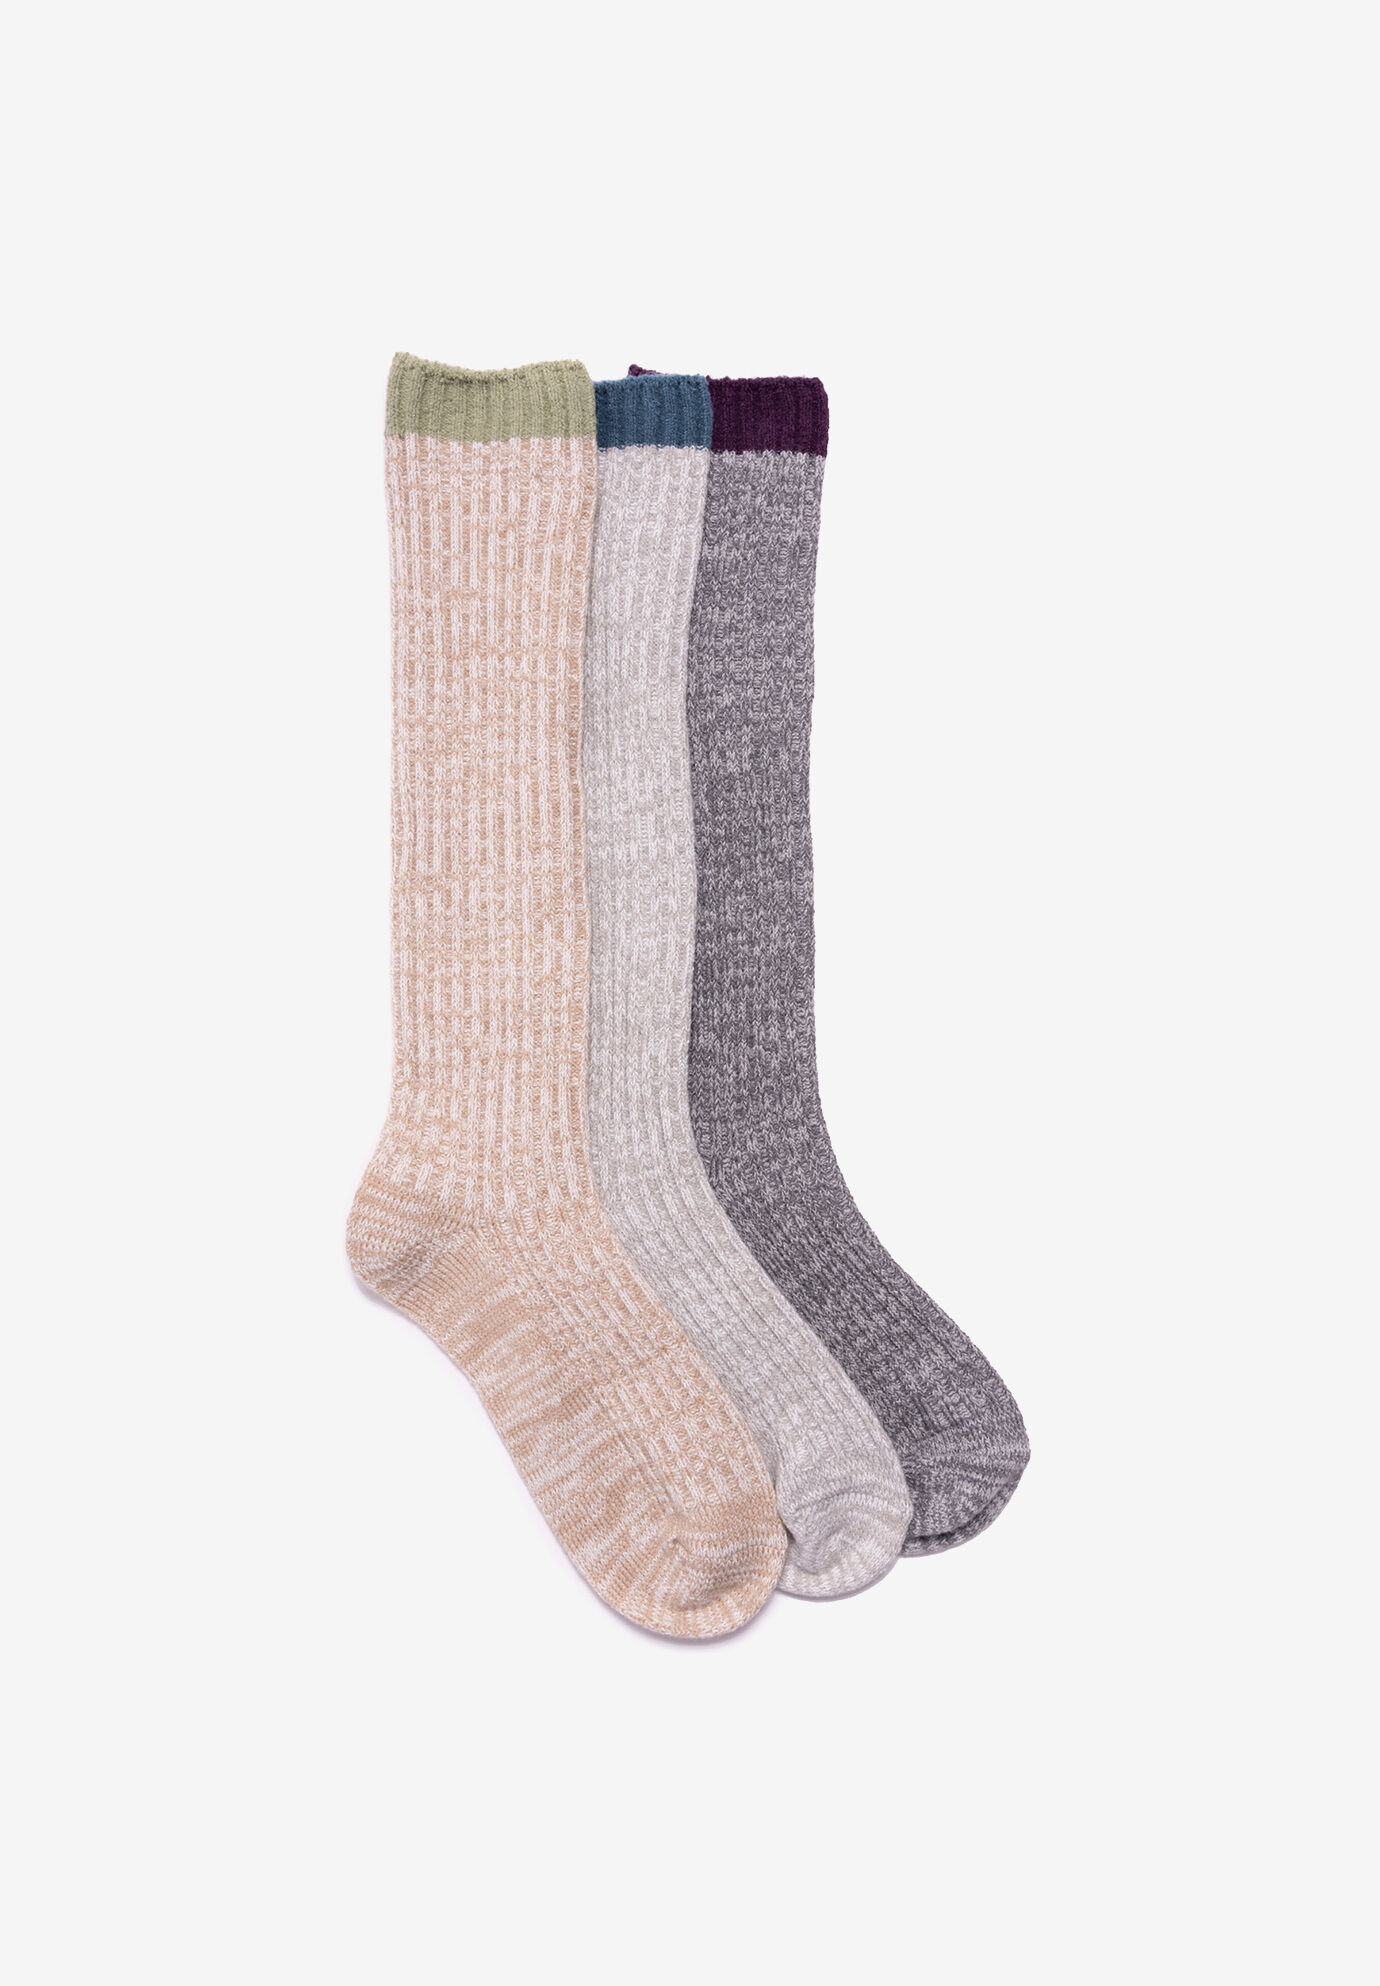 Women's 3 Pair Pack Fluffylouch Socks by MUK LUKS in Warm (Size ONE)